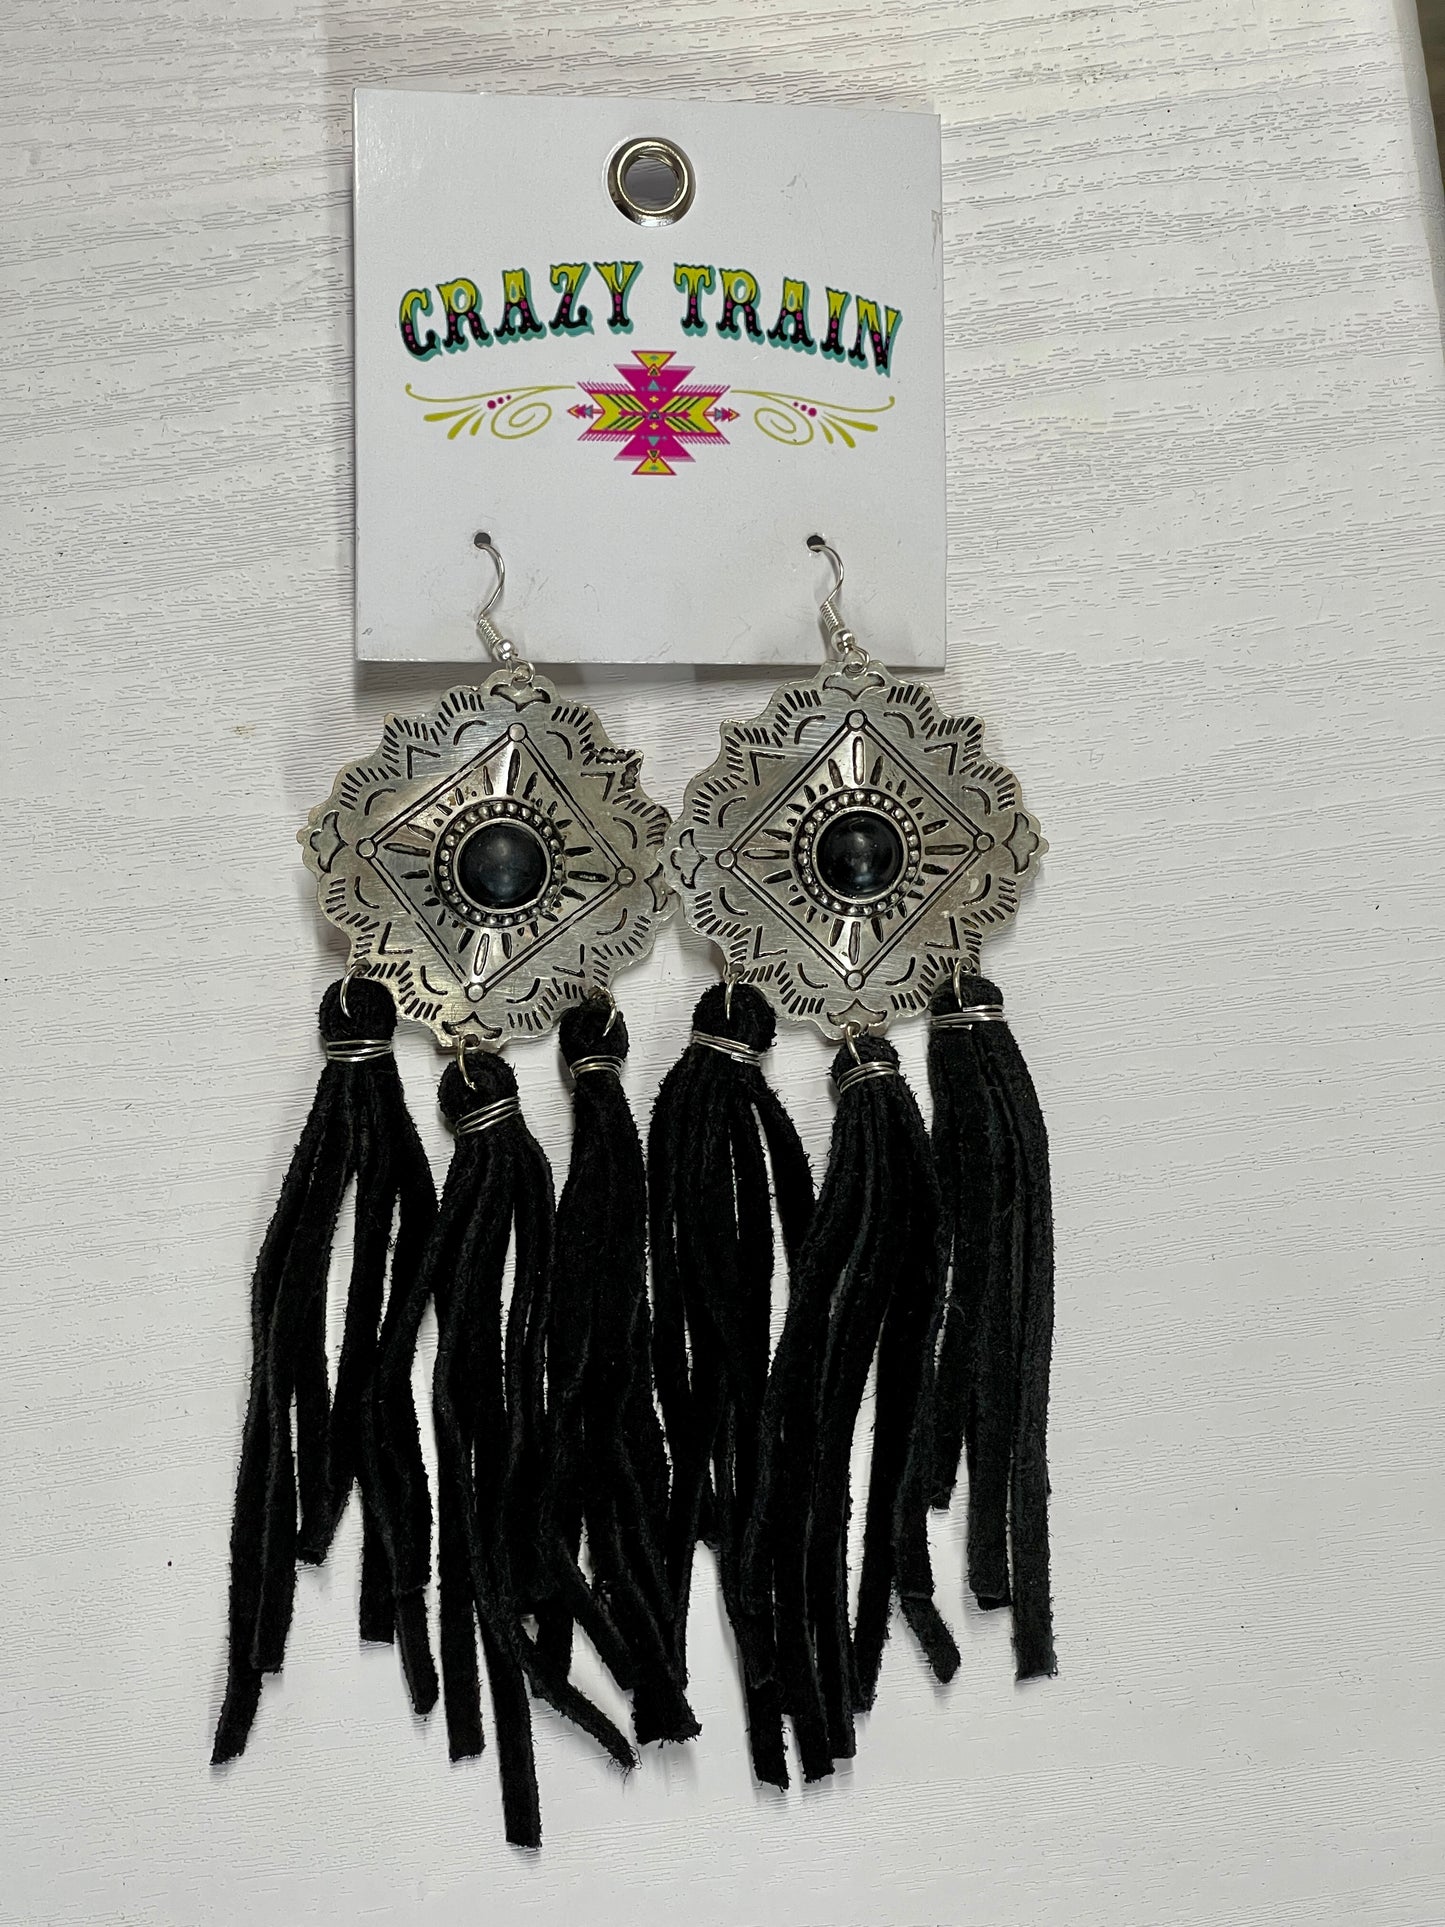 Crazy Train brand earrings. Etched silver metal diamond shaped medallions with black bead in center.  3 groups of tassels hang on the bottom.  Tassels made of black leather.